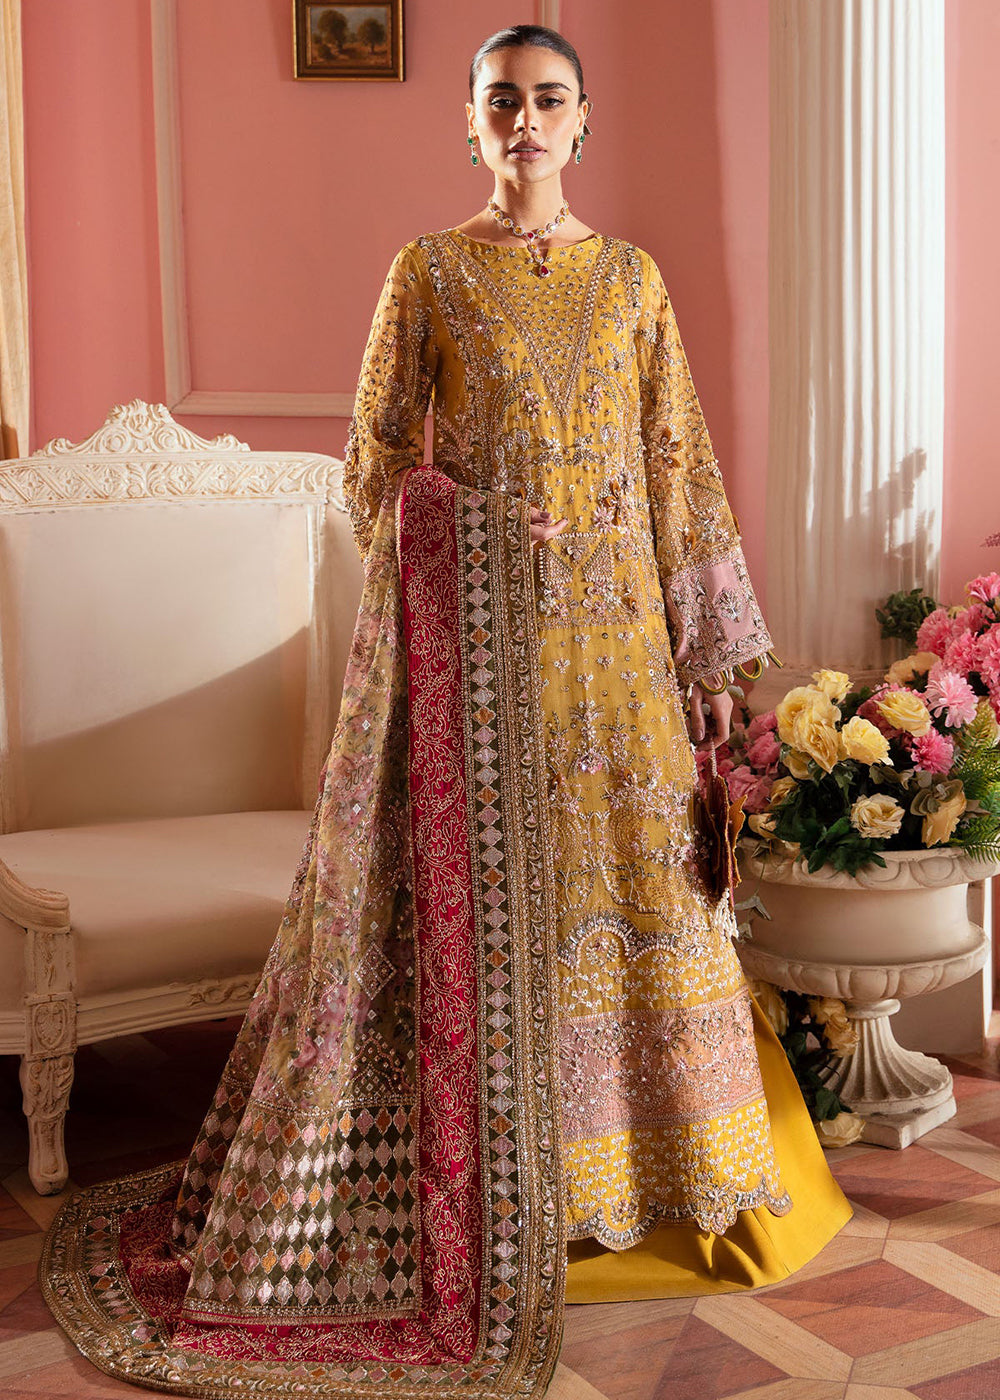 Buy Now The Secret Garden Luxury Unstitched Formals '24 by Nureh | FLORENCE Online at Empress Online in USA, UK, Canada & Worldwide at Empress Clothing.